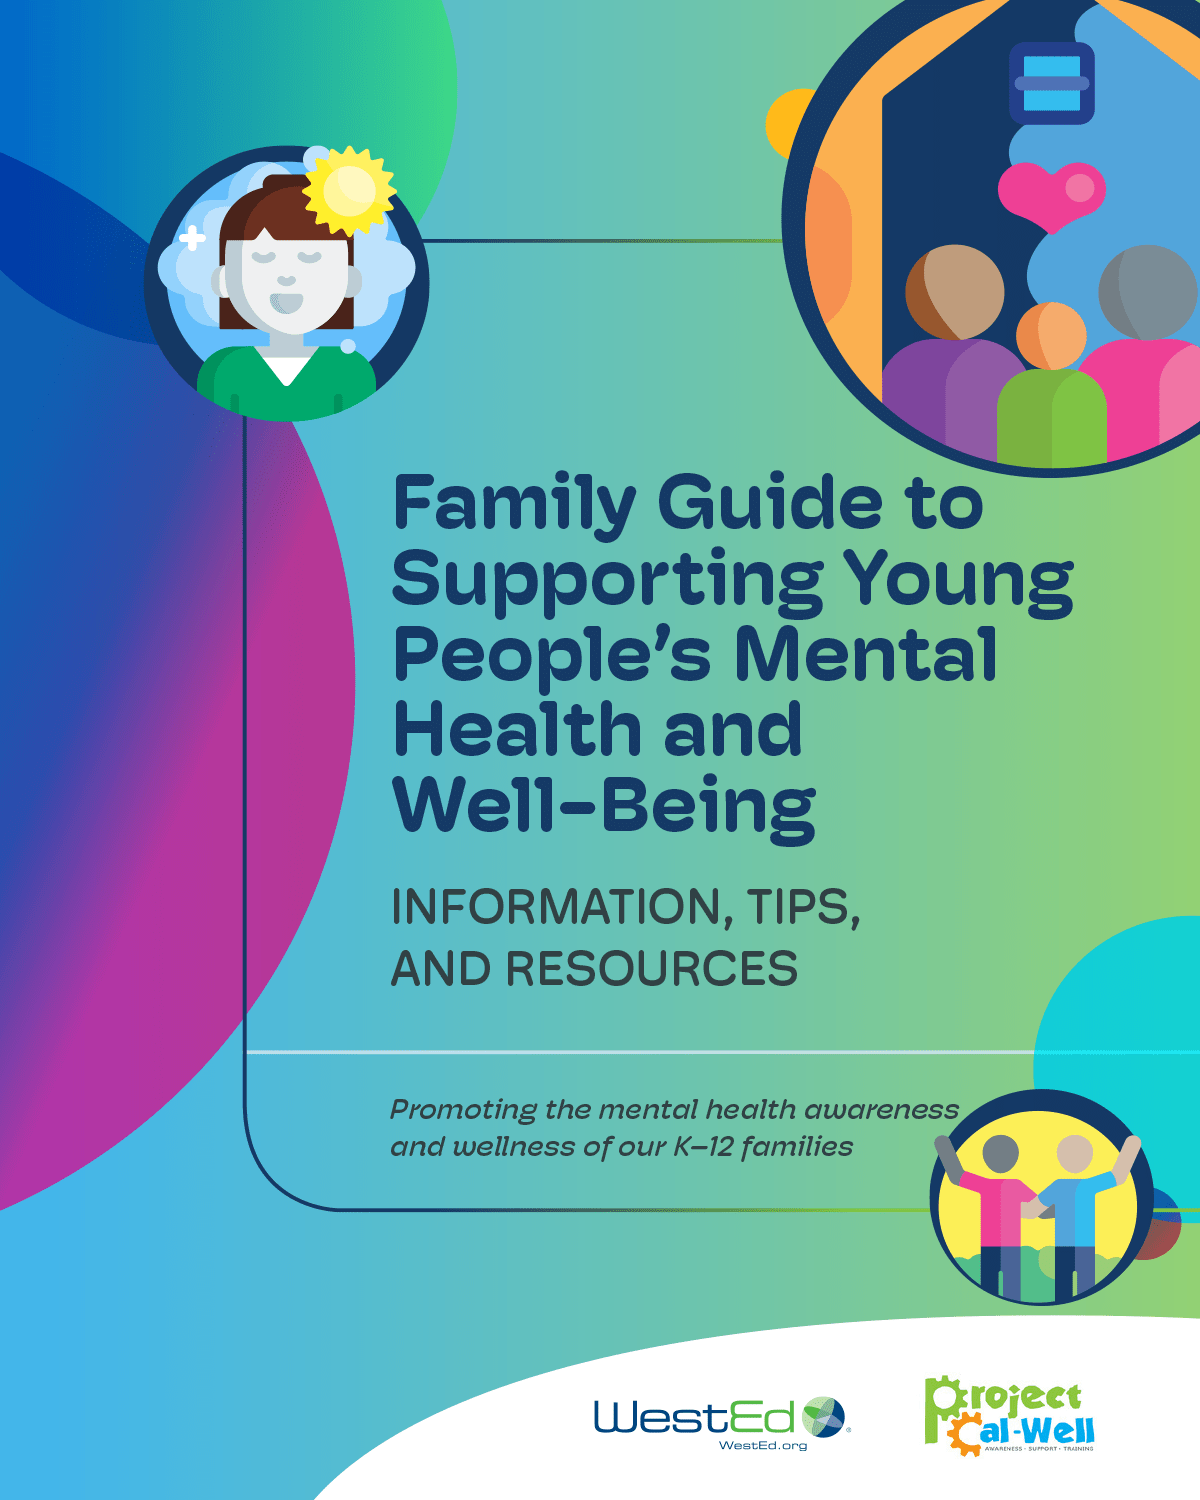 Family Guide to Supporting Young People’s Mental Health and Well-Being: Information, Tips, and Resources